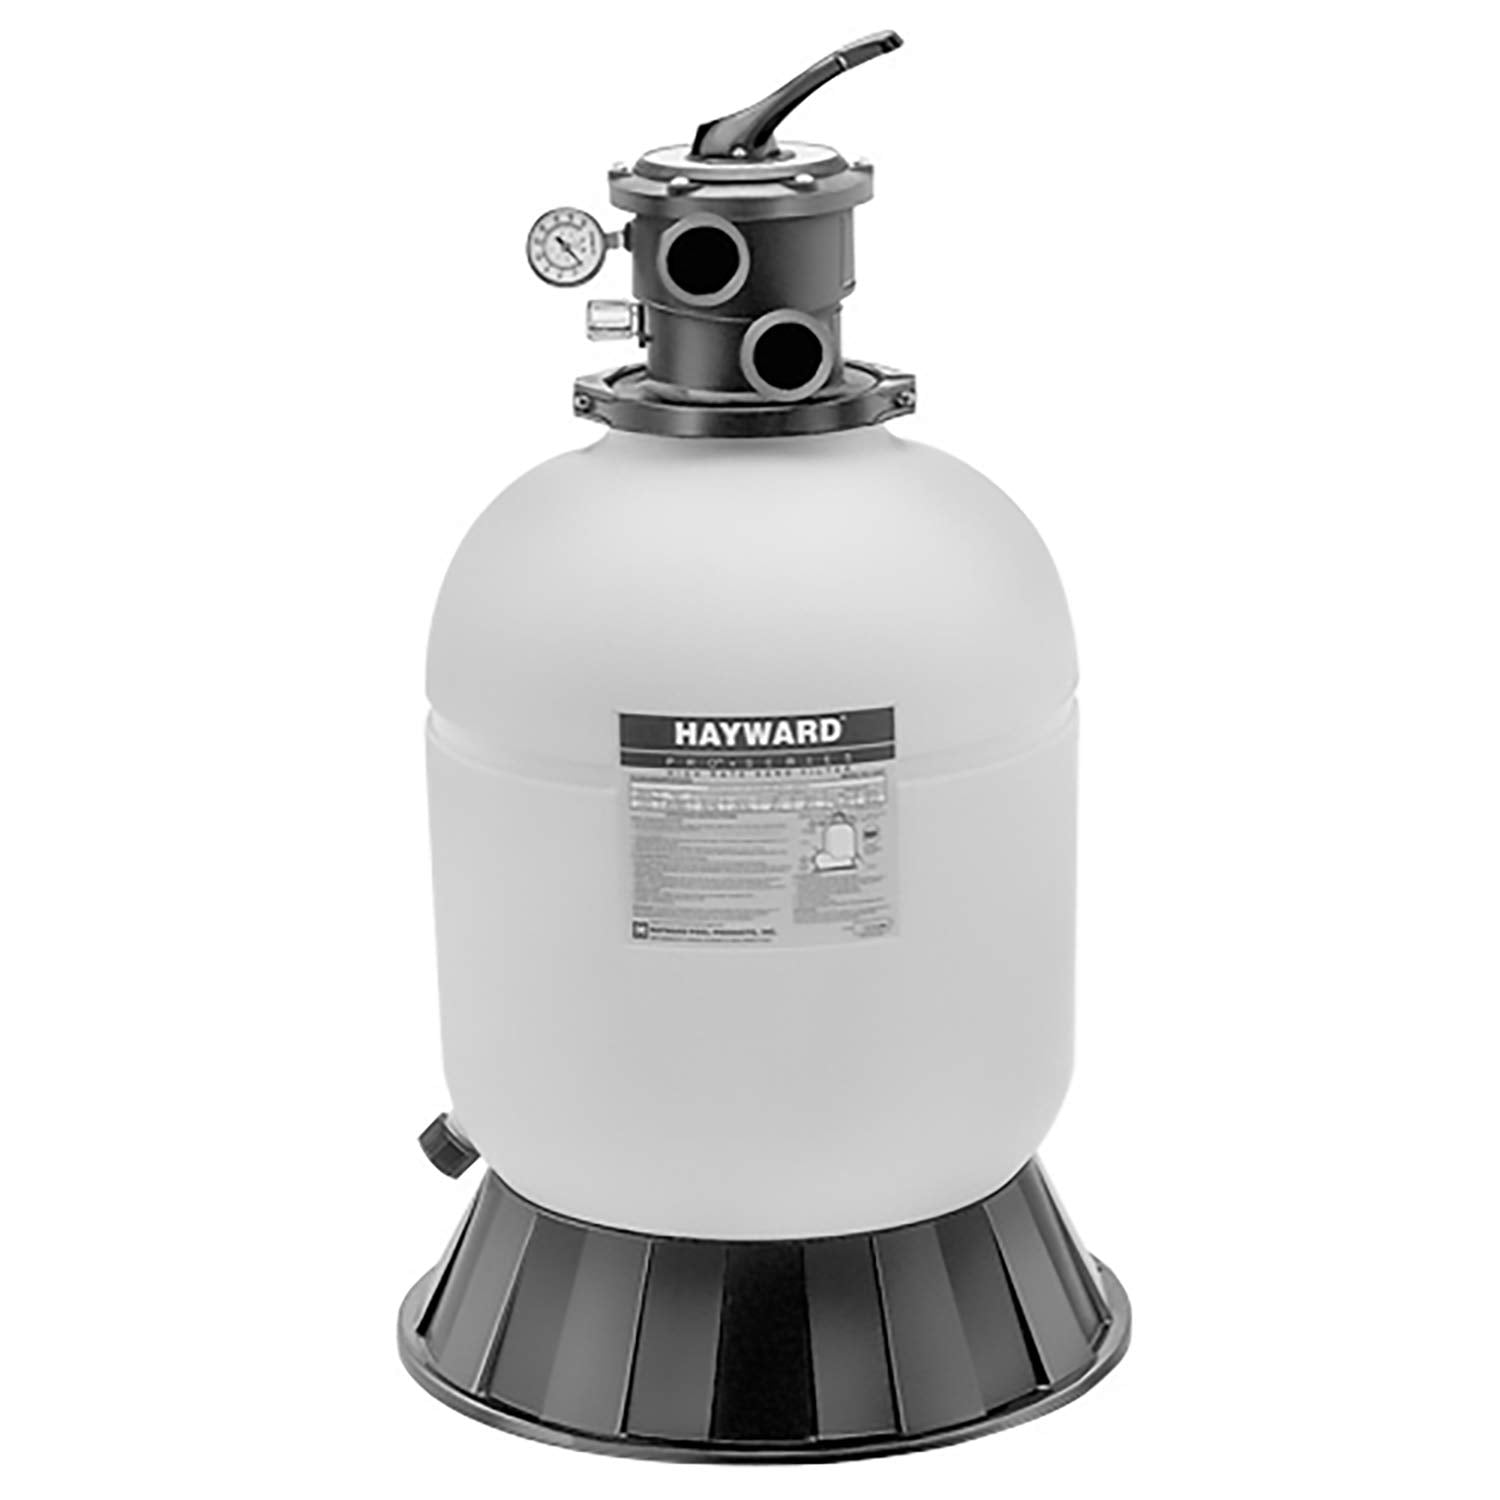 Hayward W3S180T93S ProSeries 18 In., 1.5 HP Sand Filter System for Above-Ground Pools